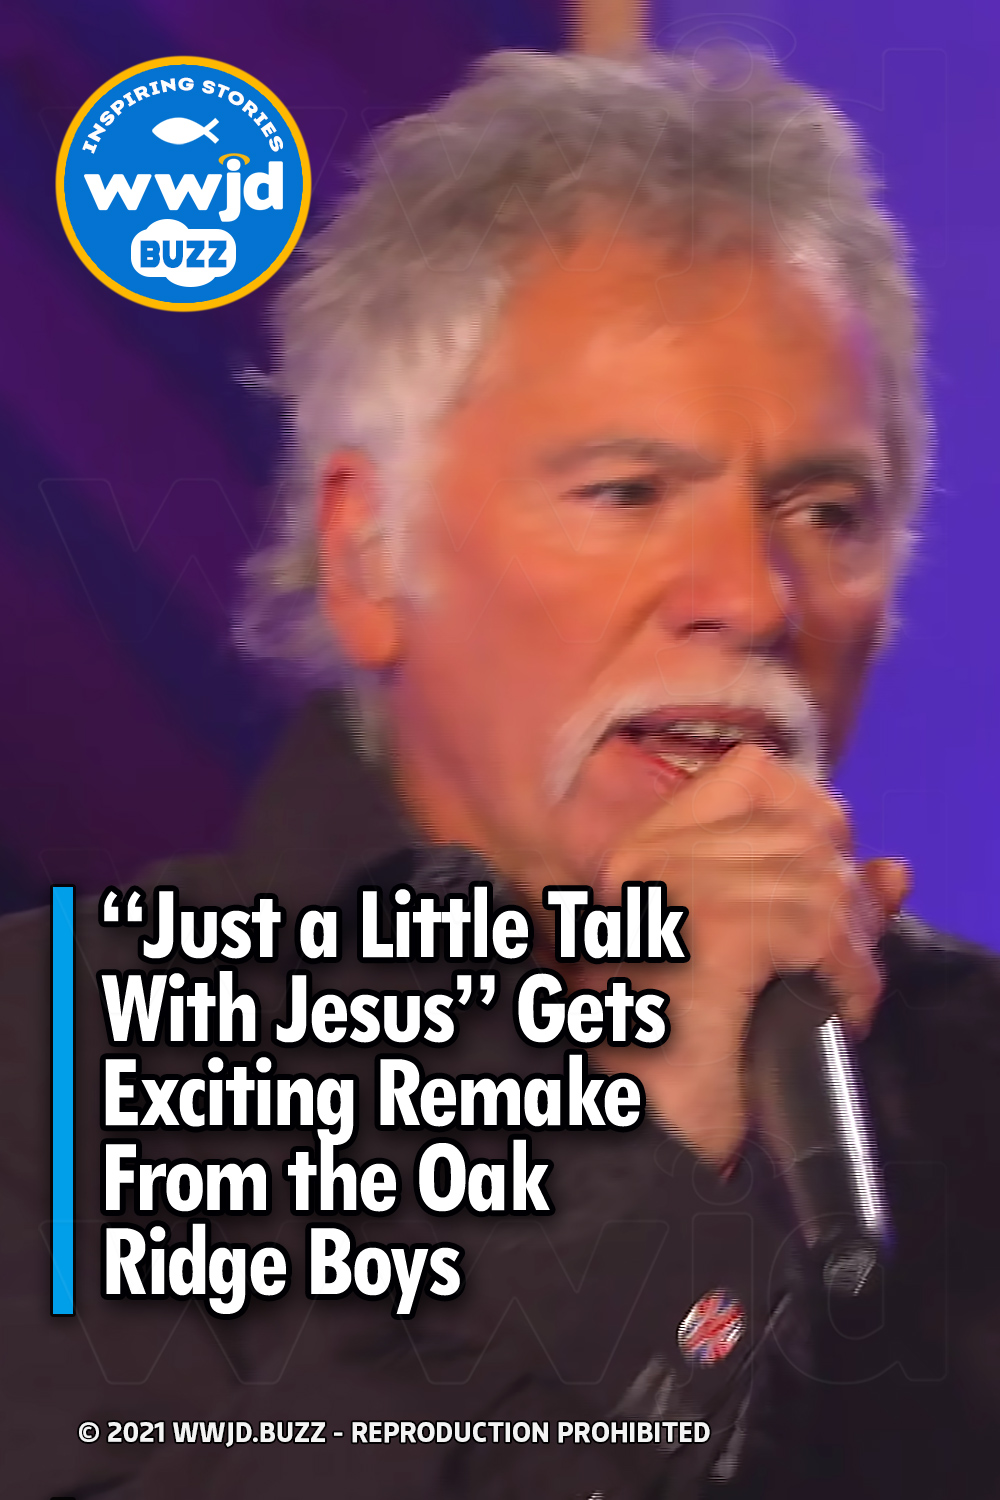 “Just a Little Talk With Jesus” Gets Exciting Remake From the Oak Ridge Boys